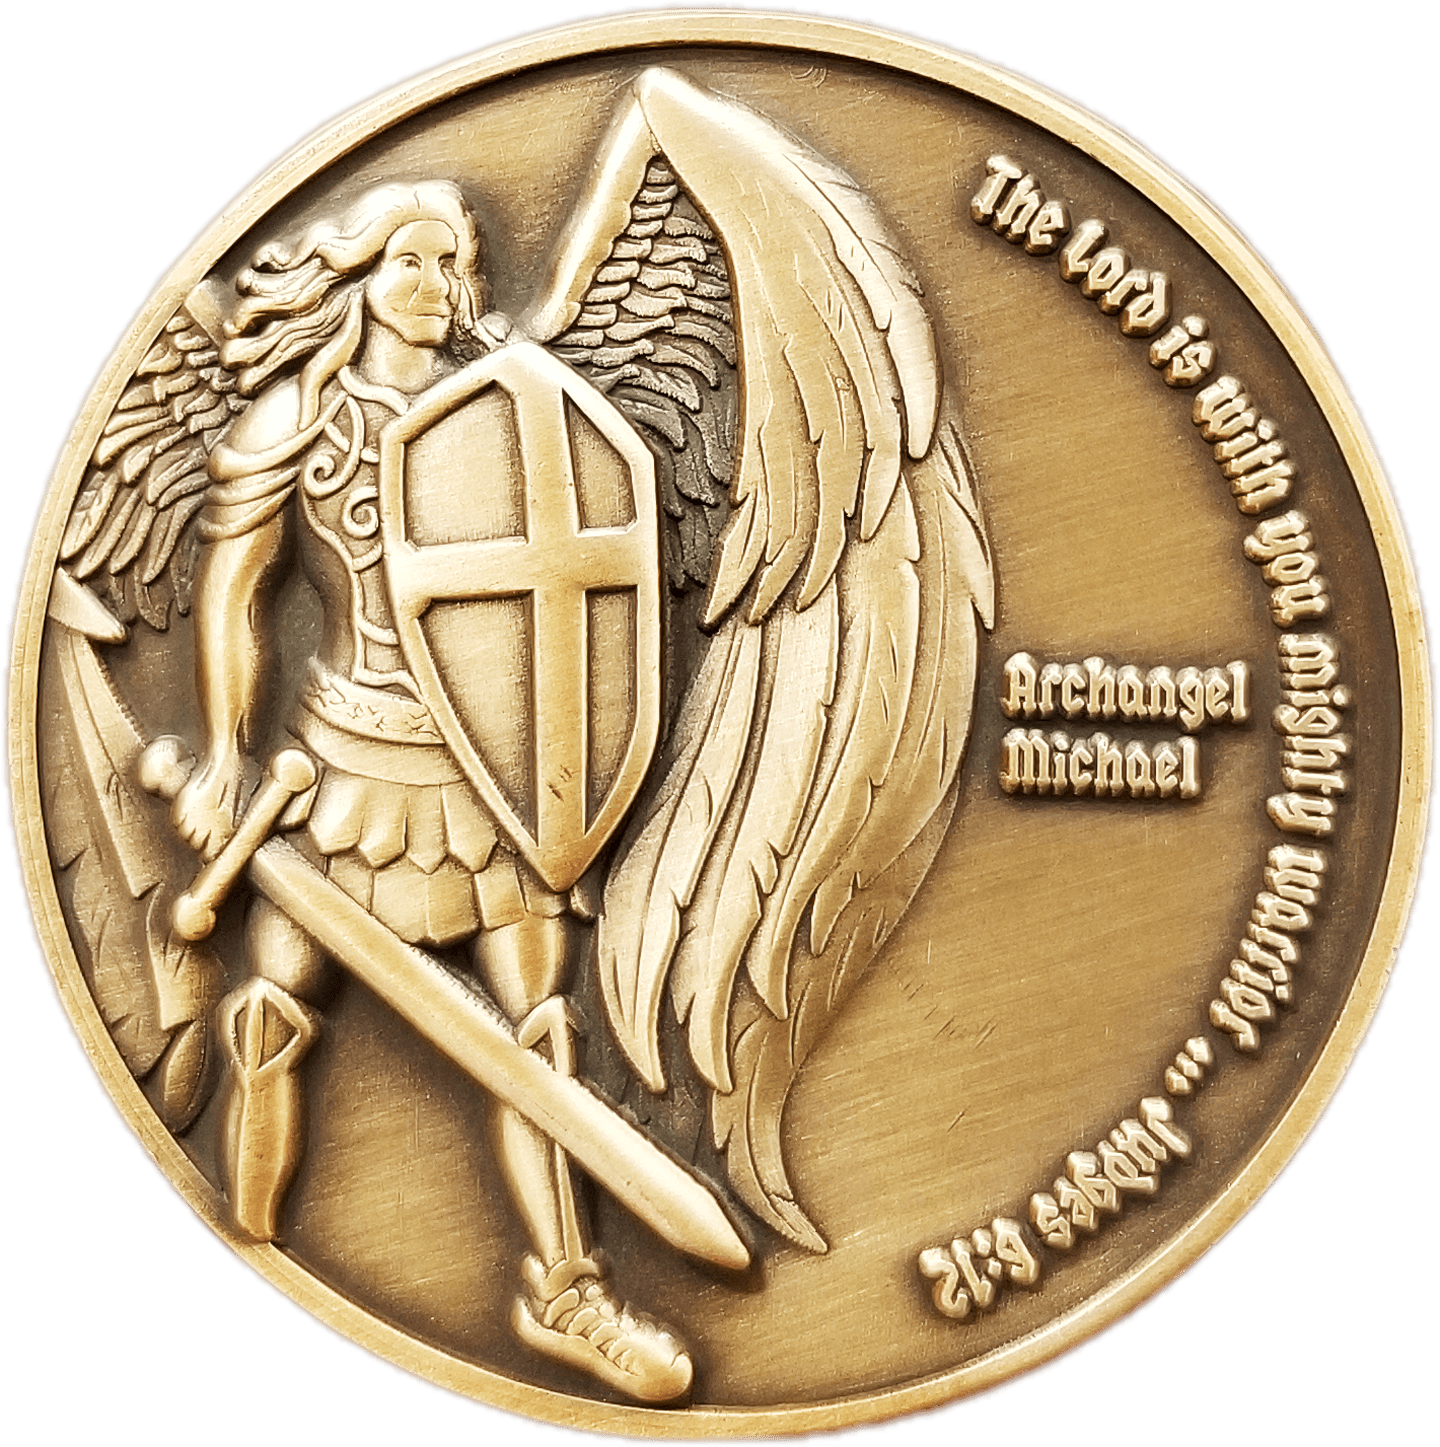 Front: Archangel Micheal with sword and shield, with text, "The Lord is with you mighty warrior... Judges 6:12"